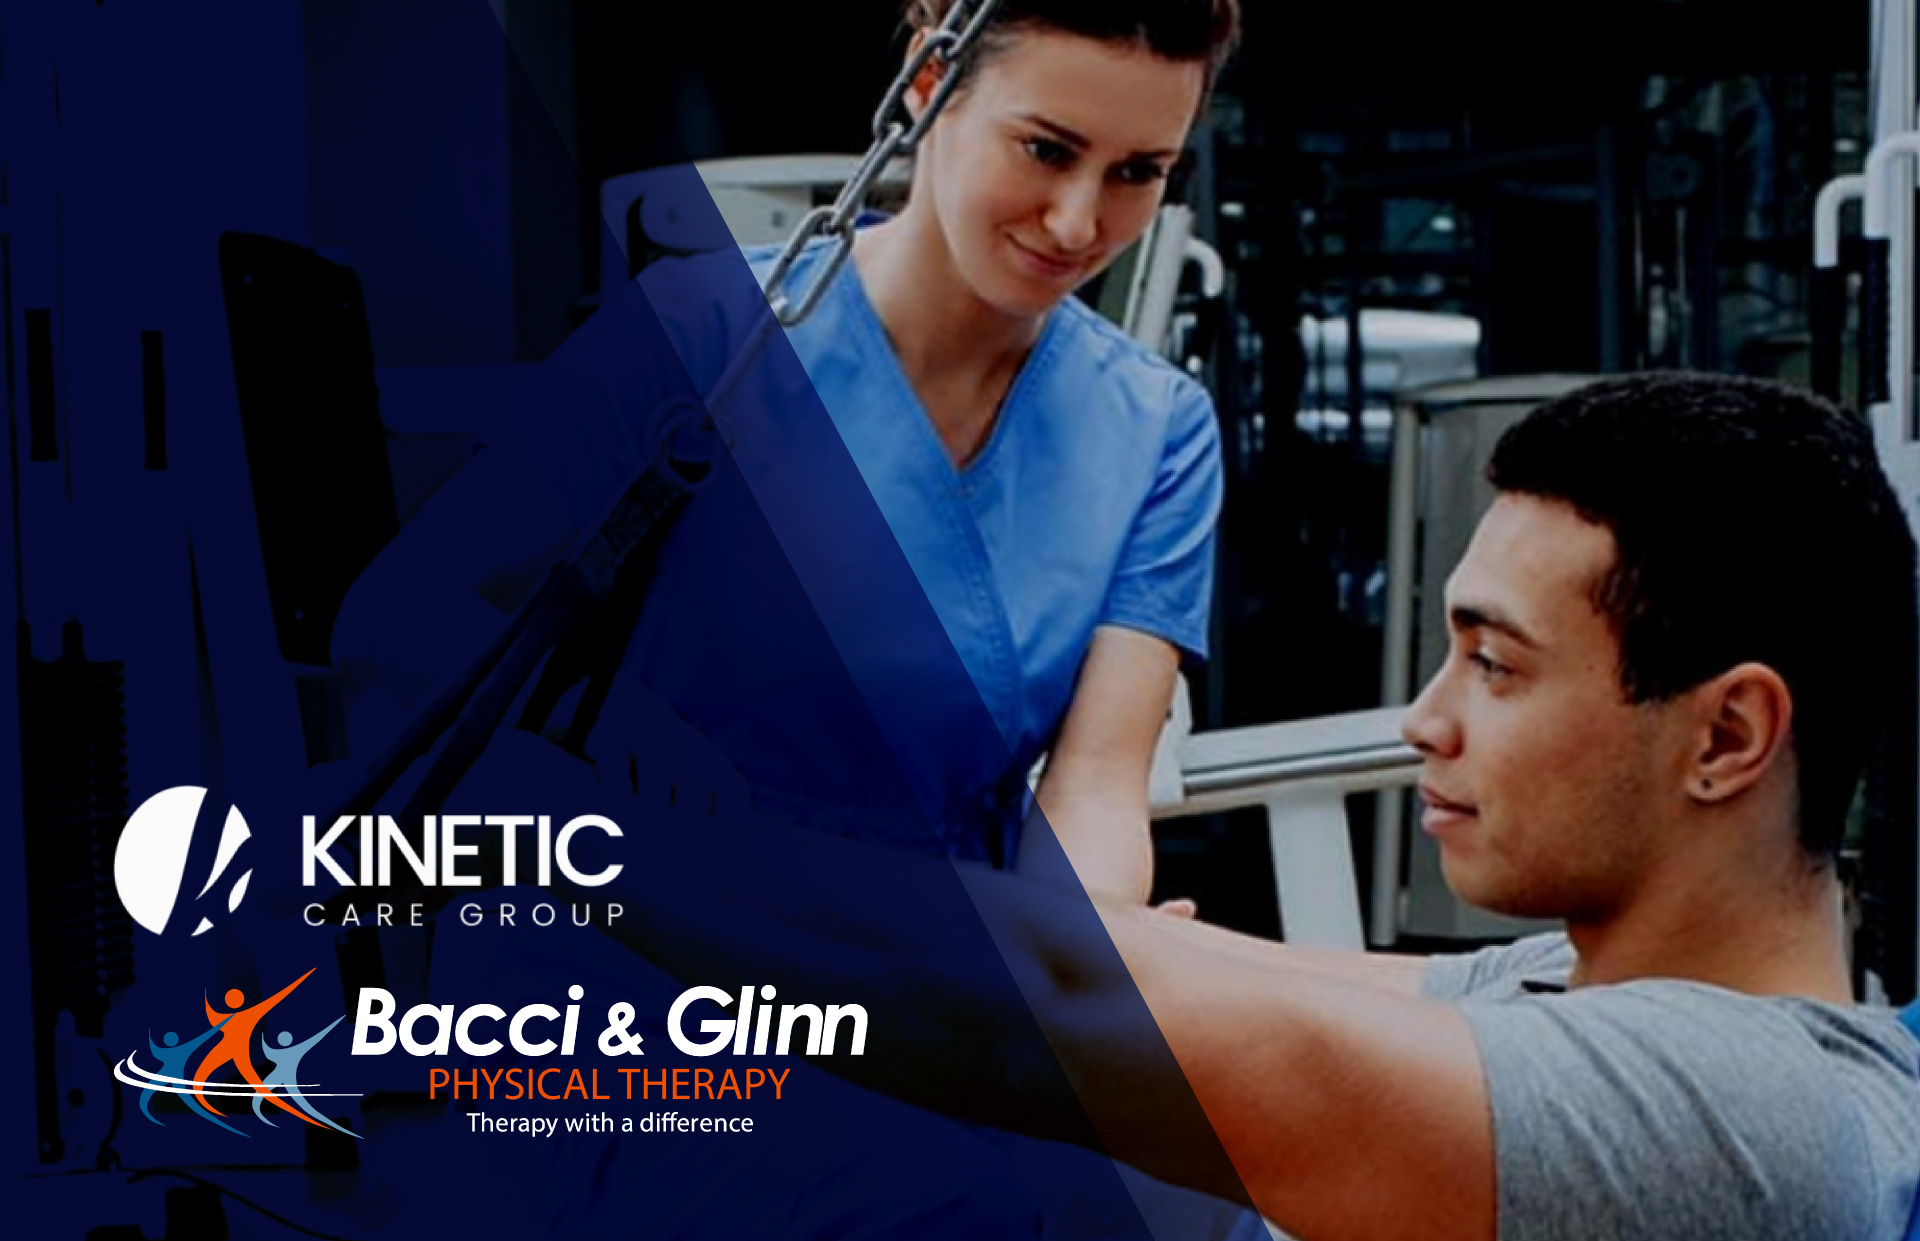 How WelcomeWare Enabled Bacci & Glinn to Retain Their Front Office Manager and Increase Patient Check-In Efficiency